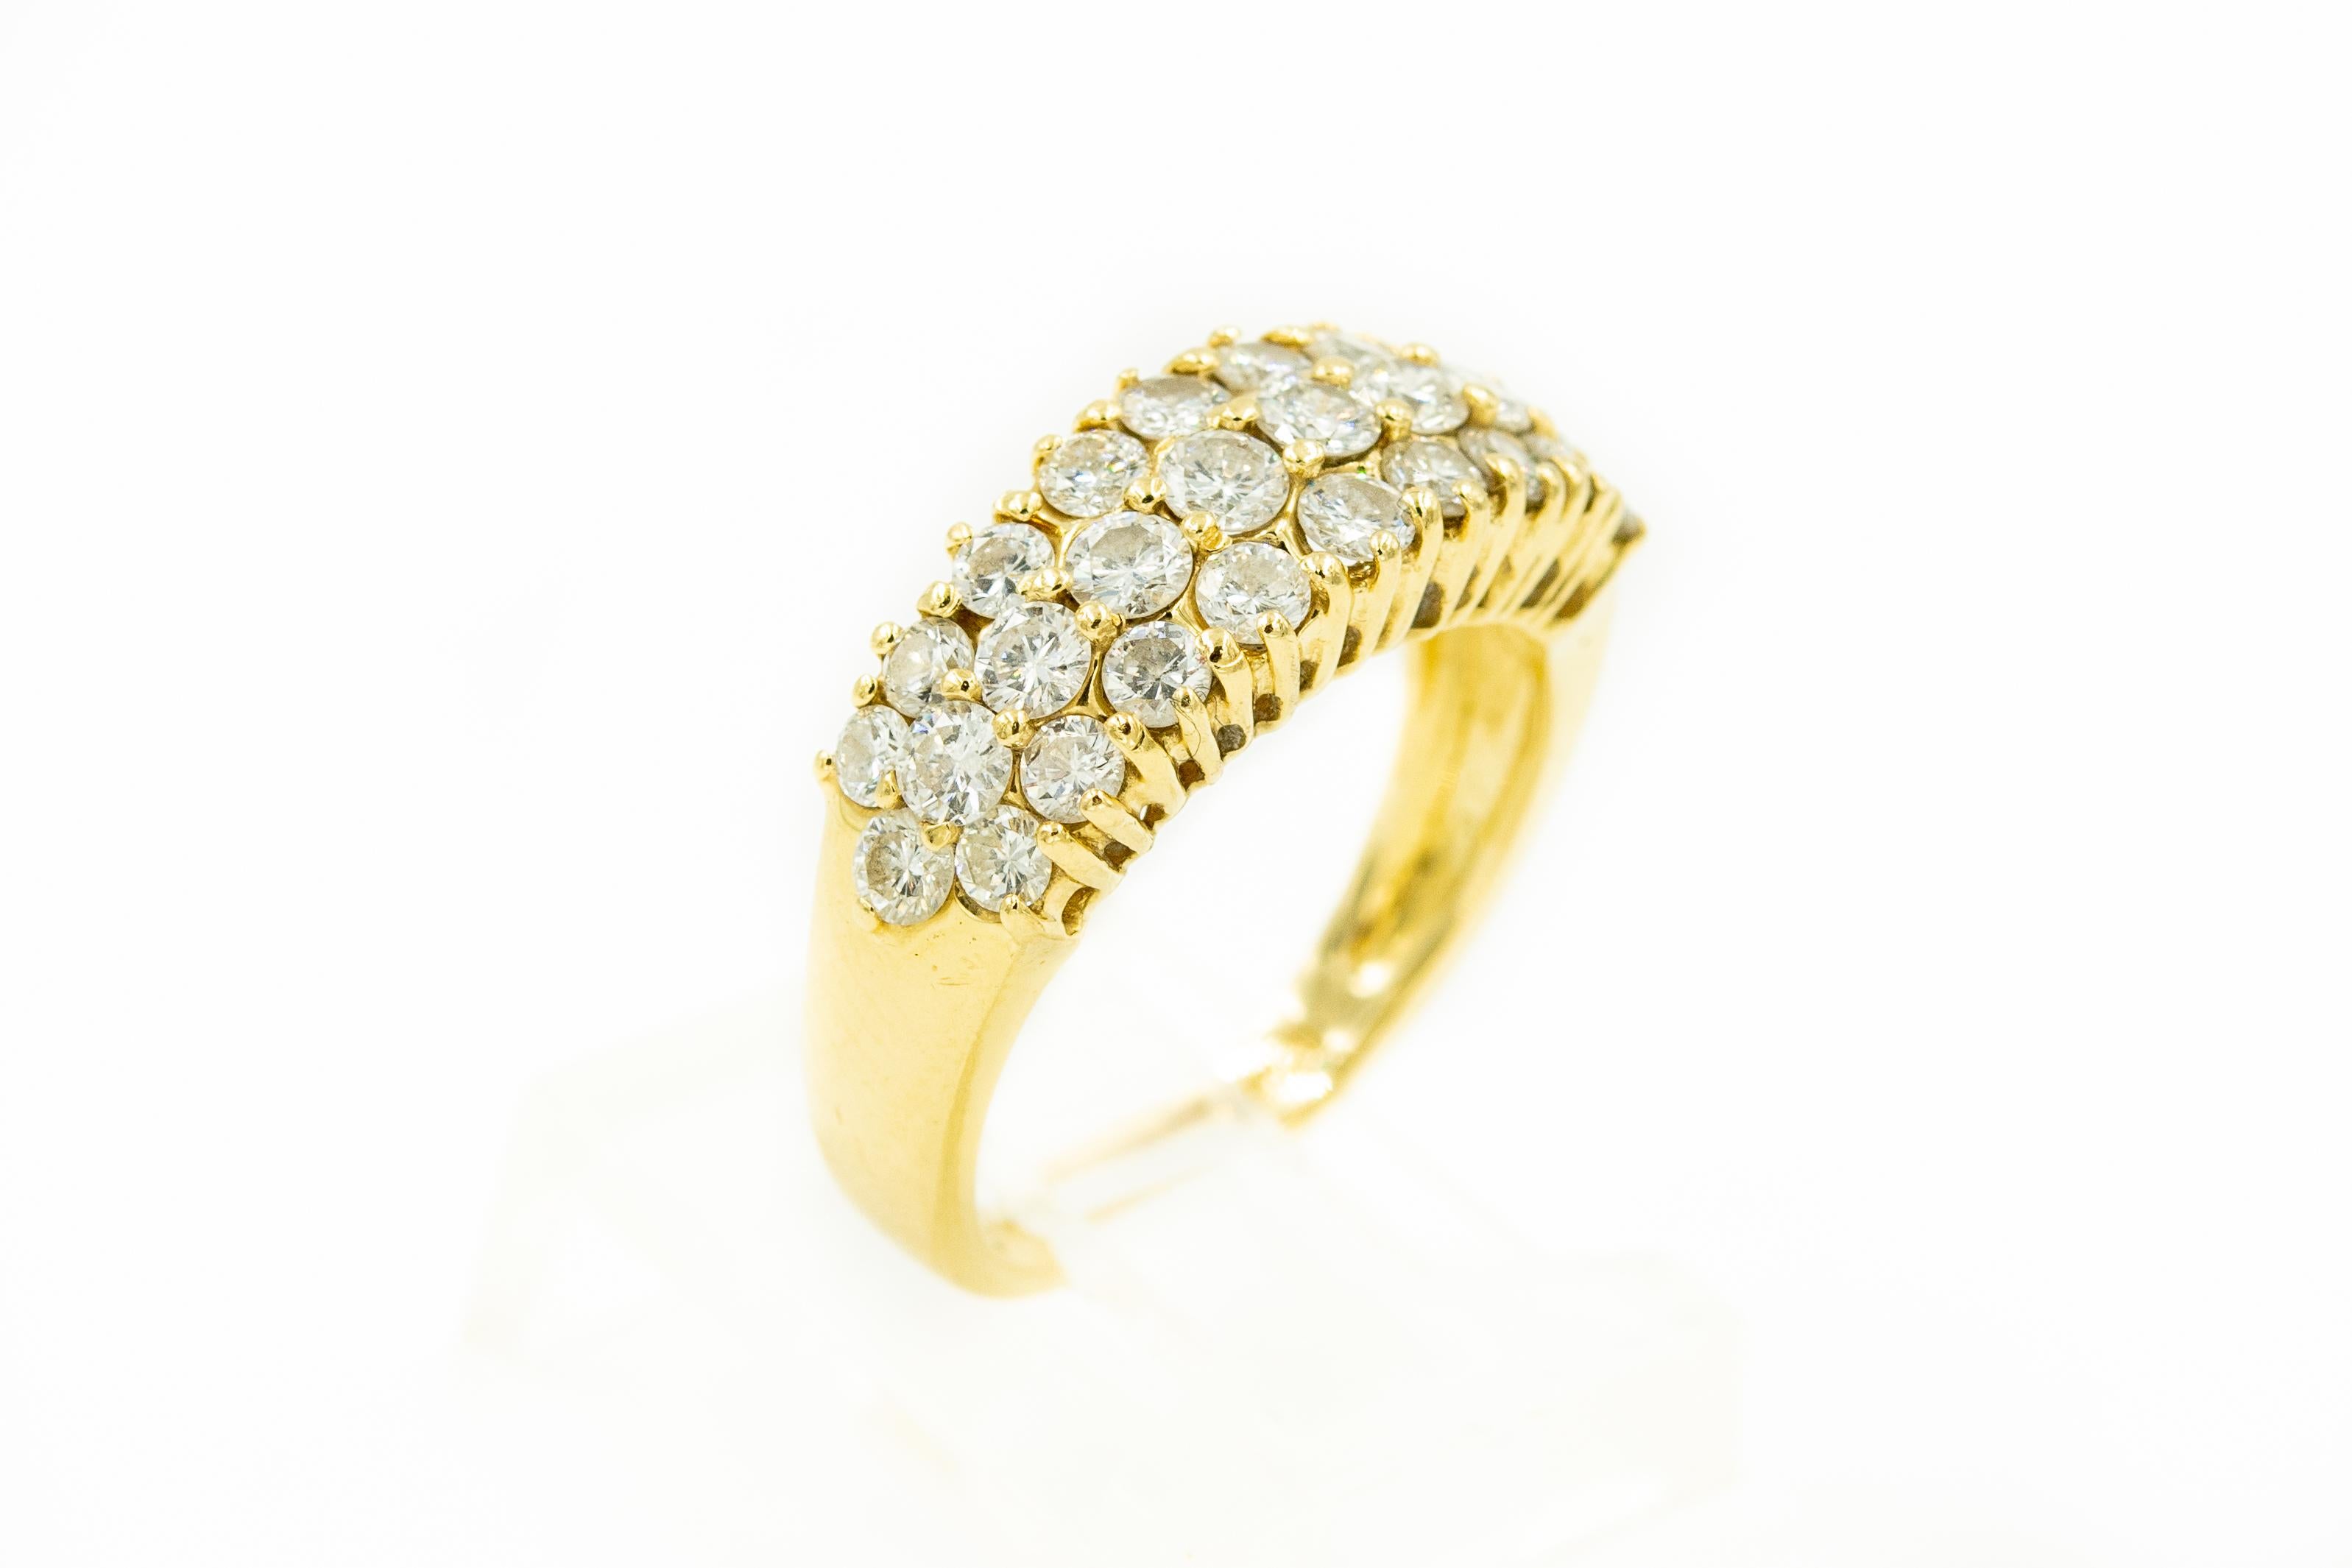 Triple Row Diamond Yellow Gold Band Ring with Three Rows of Diamonds in Front 1